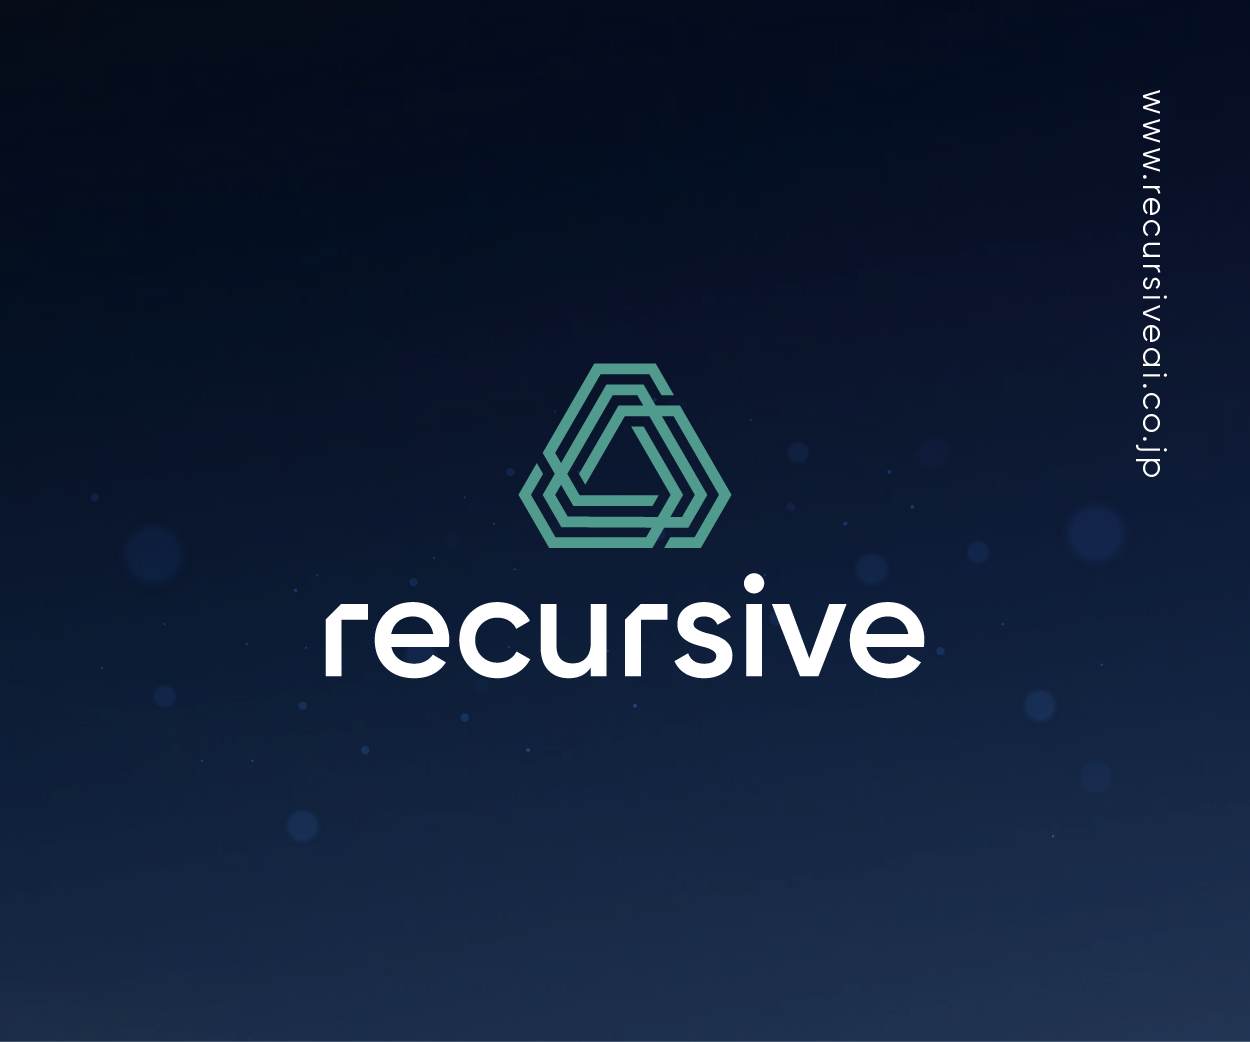 Recursive a consulting company working on developing AI systems with a focus on sustainability Logo Design Image